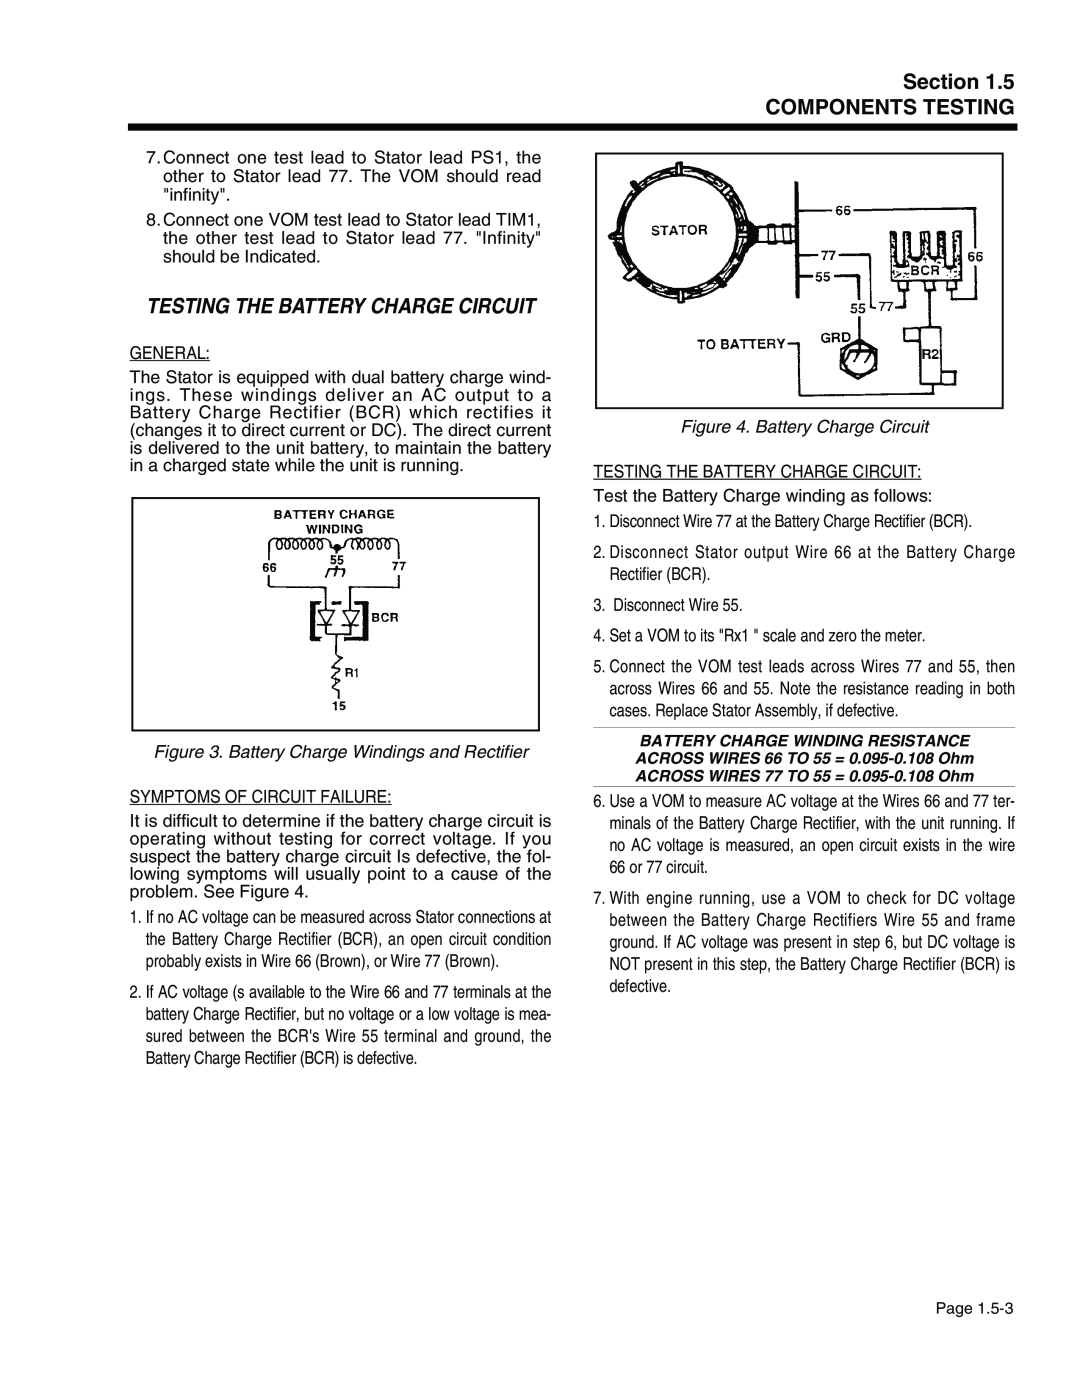 Generac Power Systems 941-2, 940-2 service manual Testing The Battery Charge Circuit, Battery Charge Windings and Rectifier 